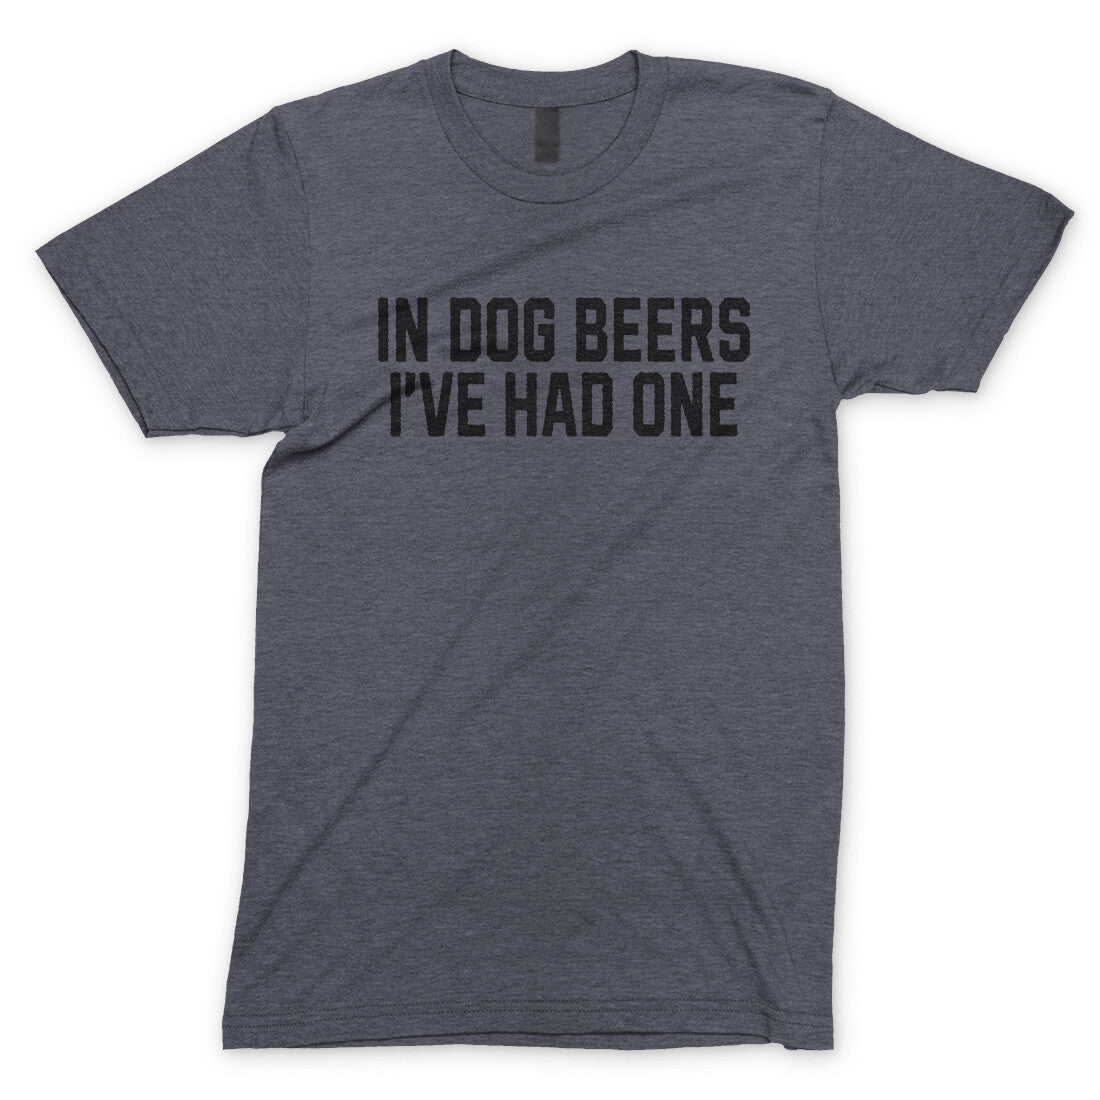 In Dog Beers I've Had One in Dark Heather Color